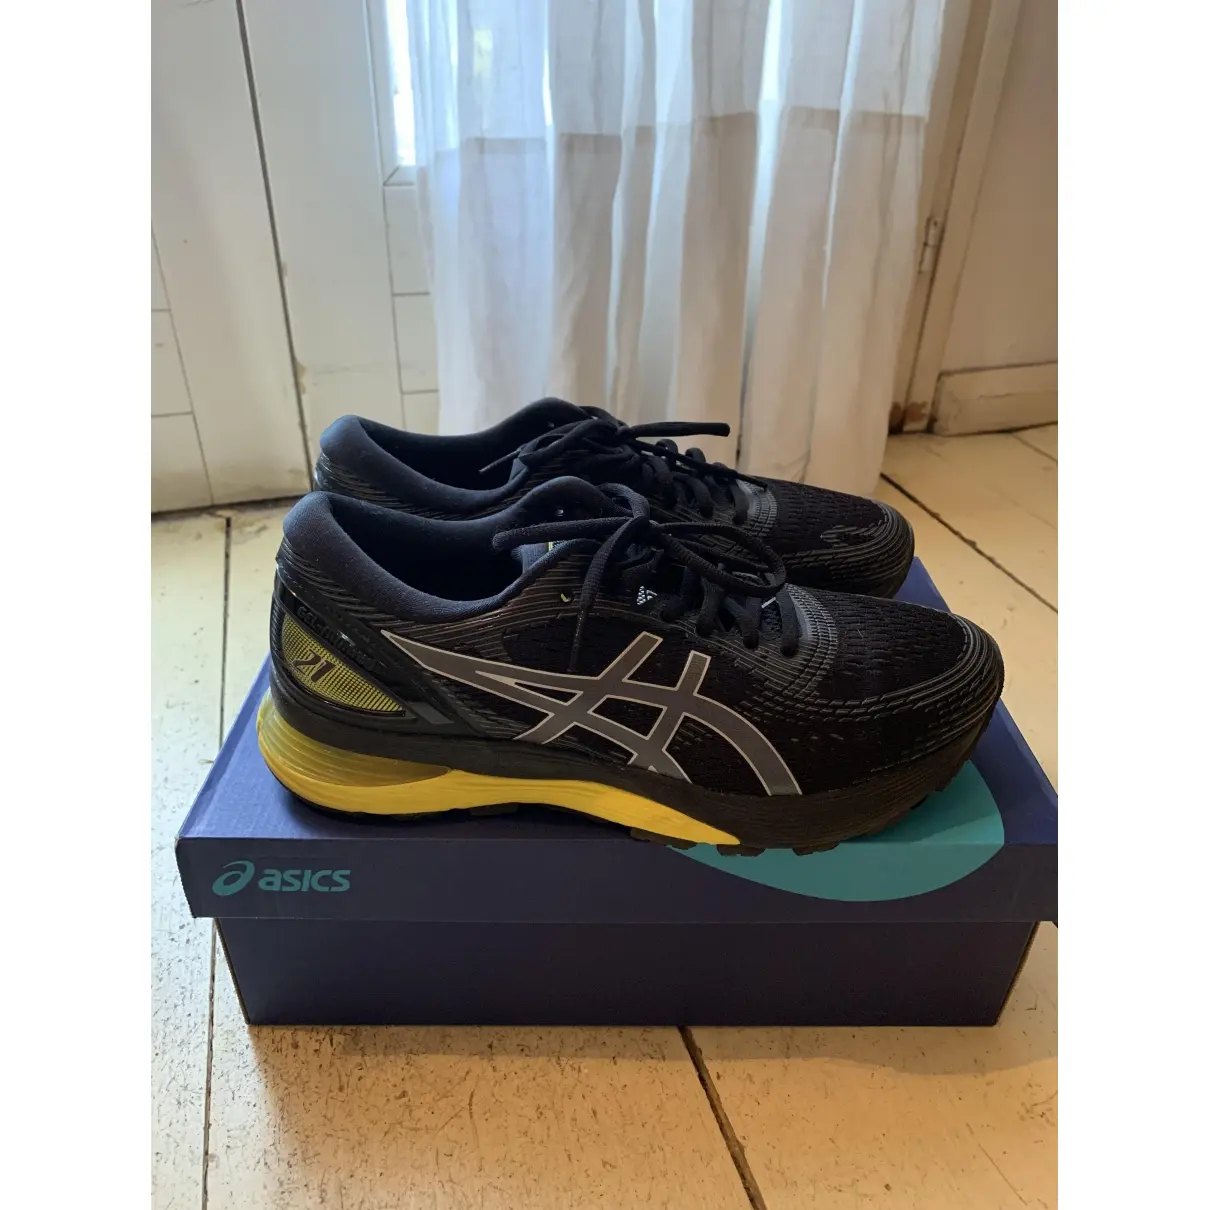 Asics Low trainers for sale